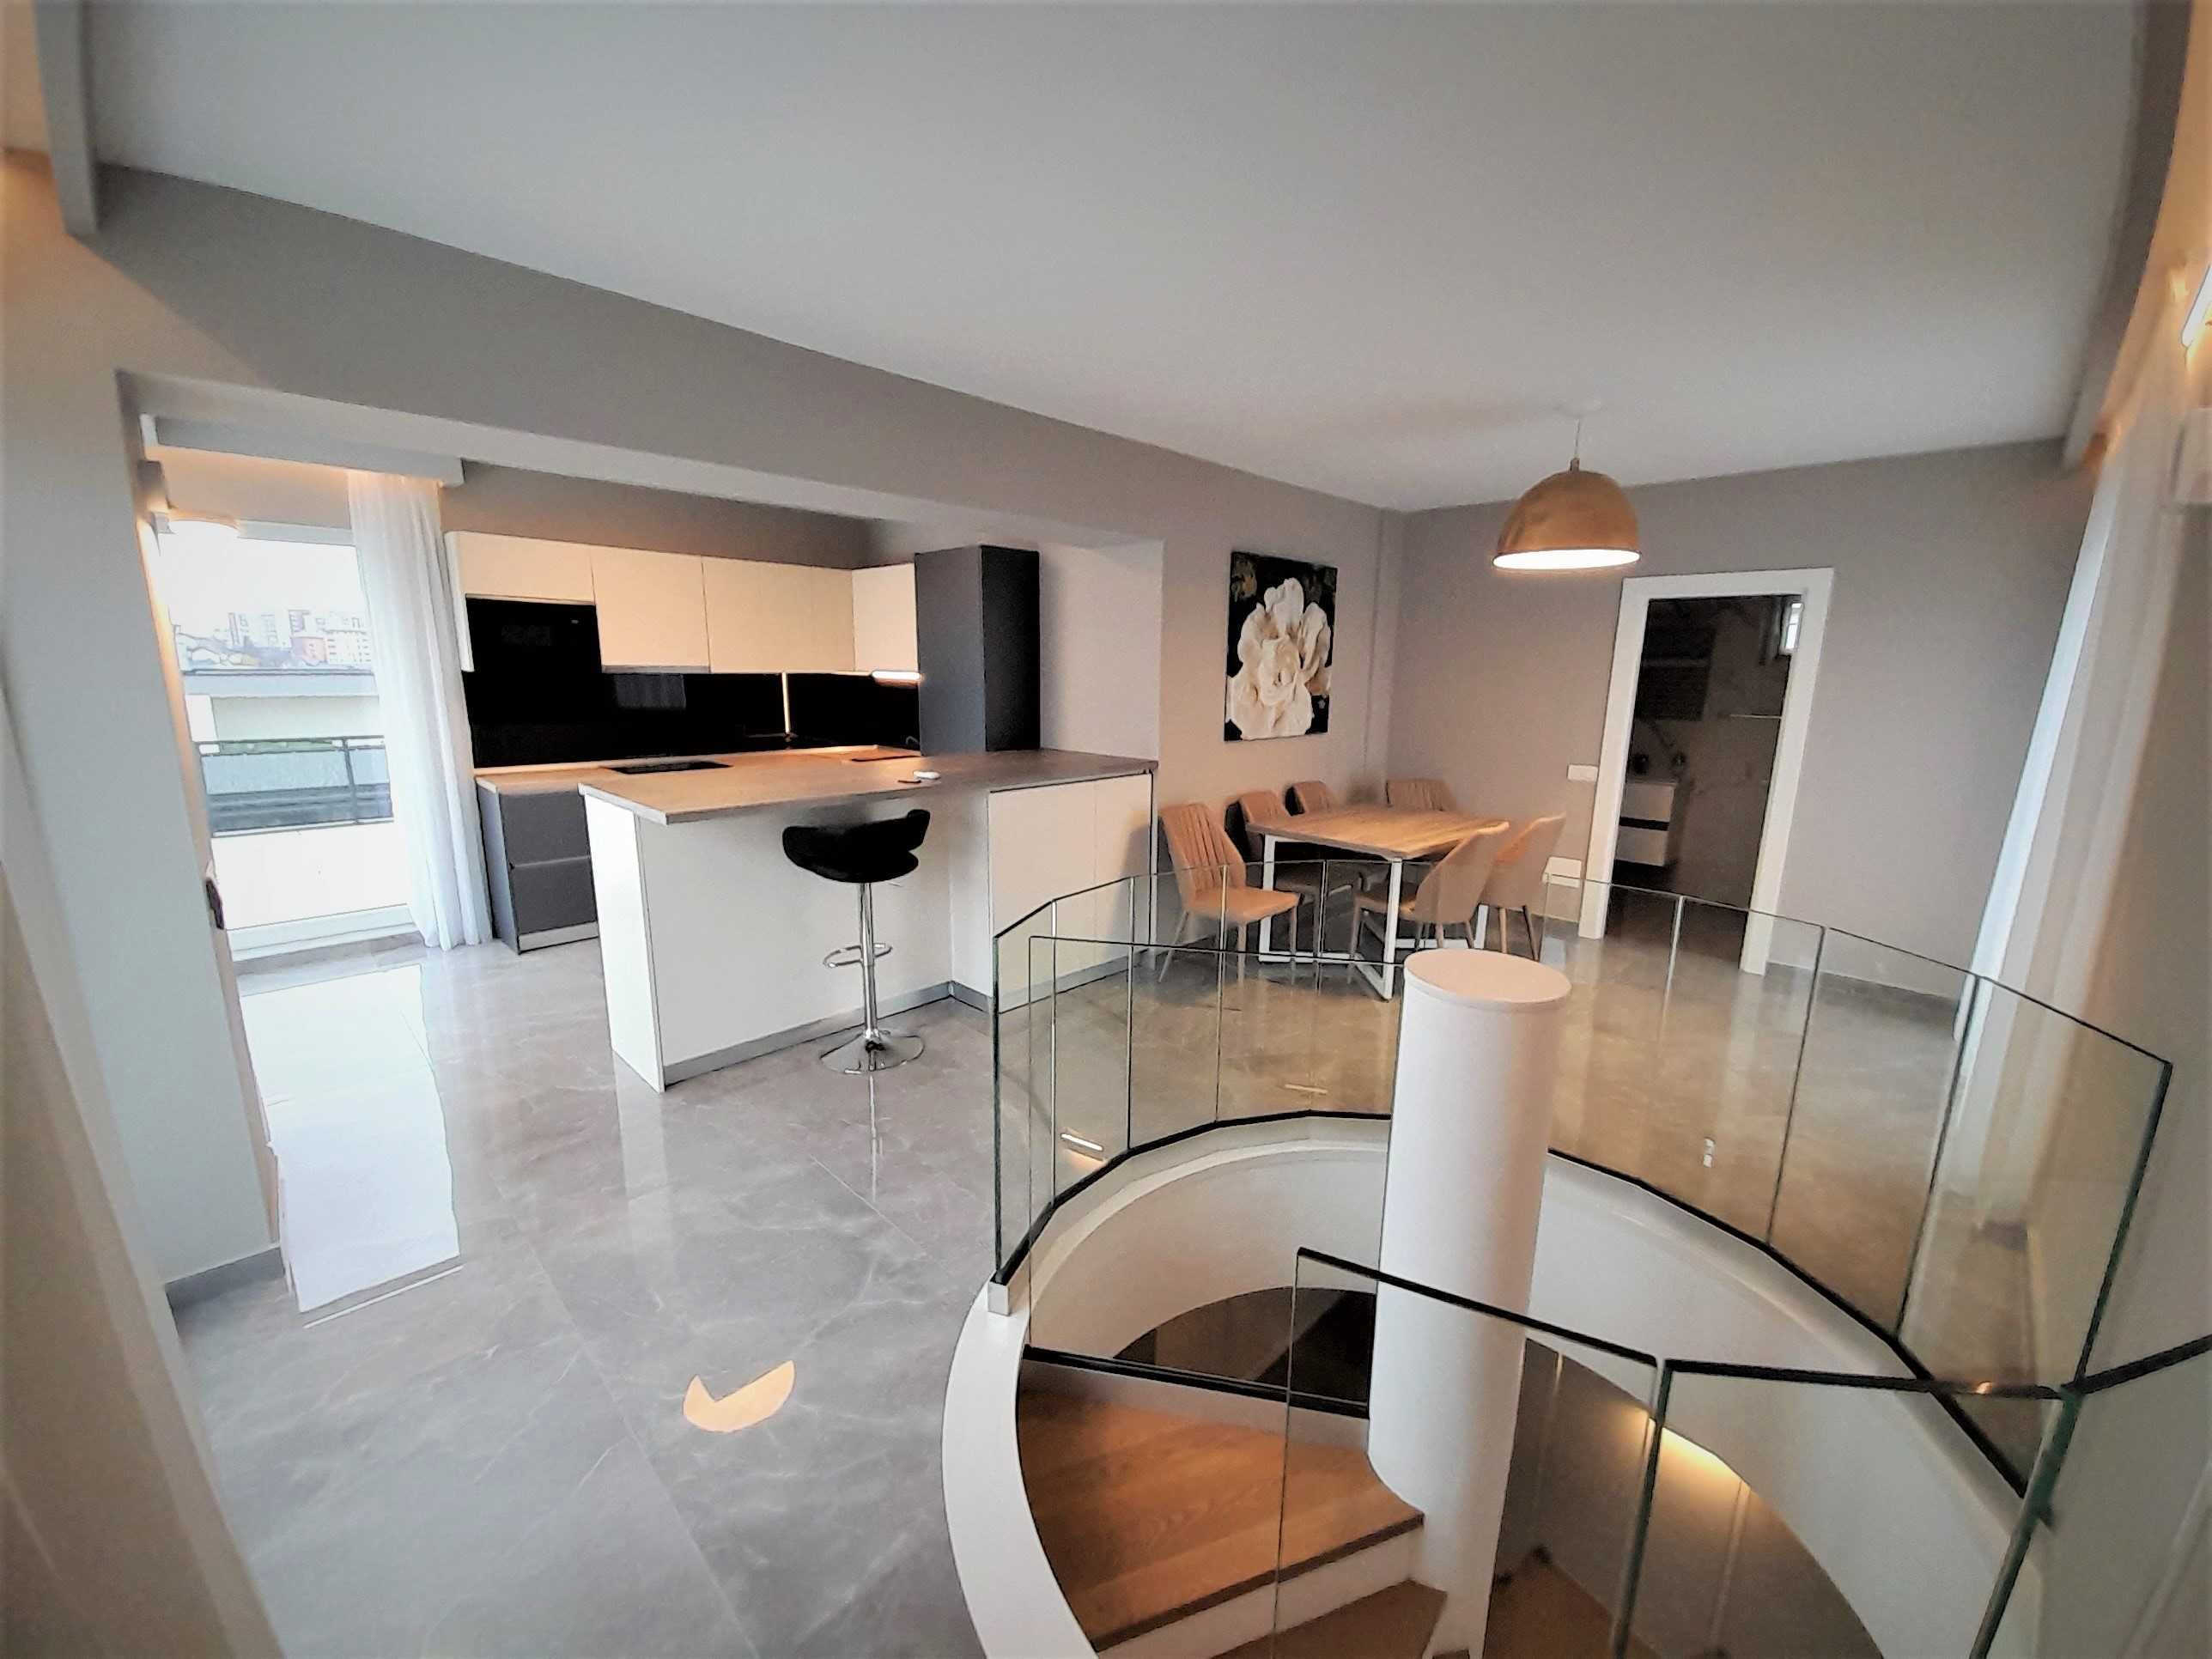 Proprietar Inchiriez penthouse lux, 3 camere, in Bonjour Residence